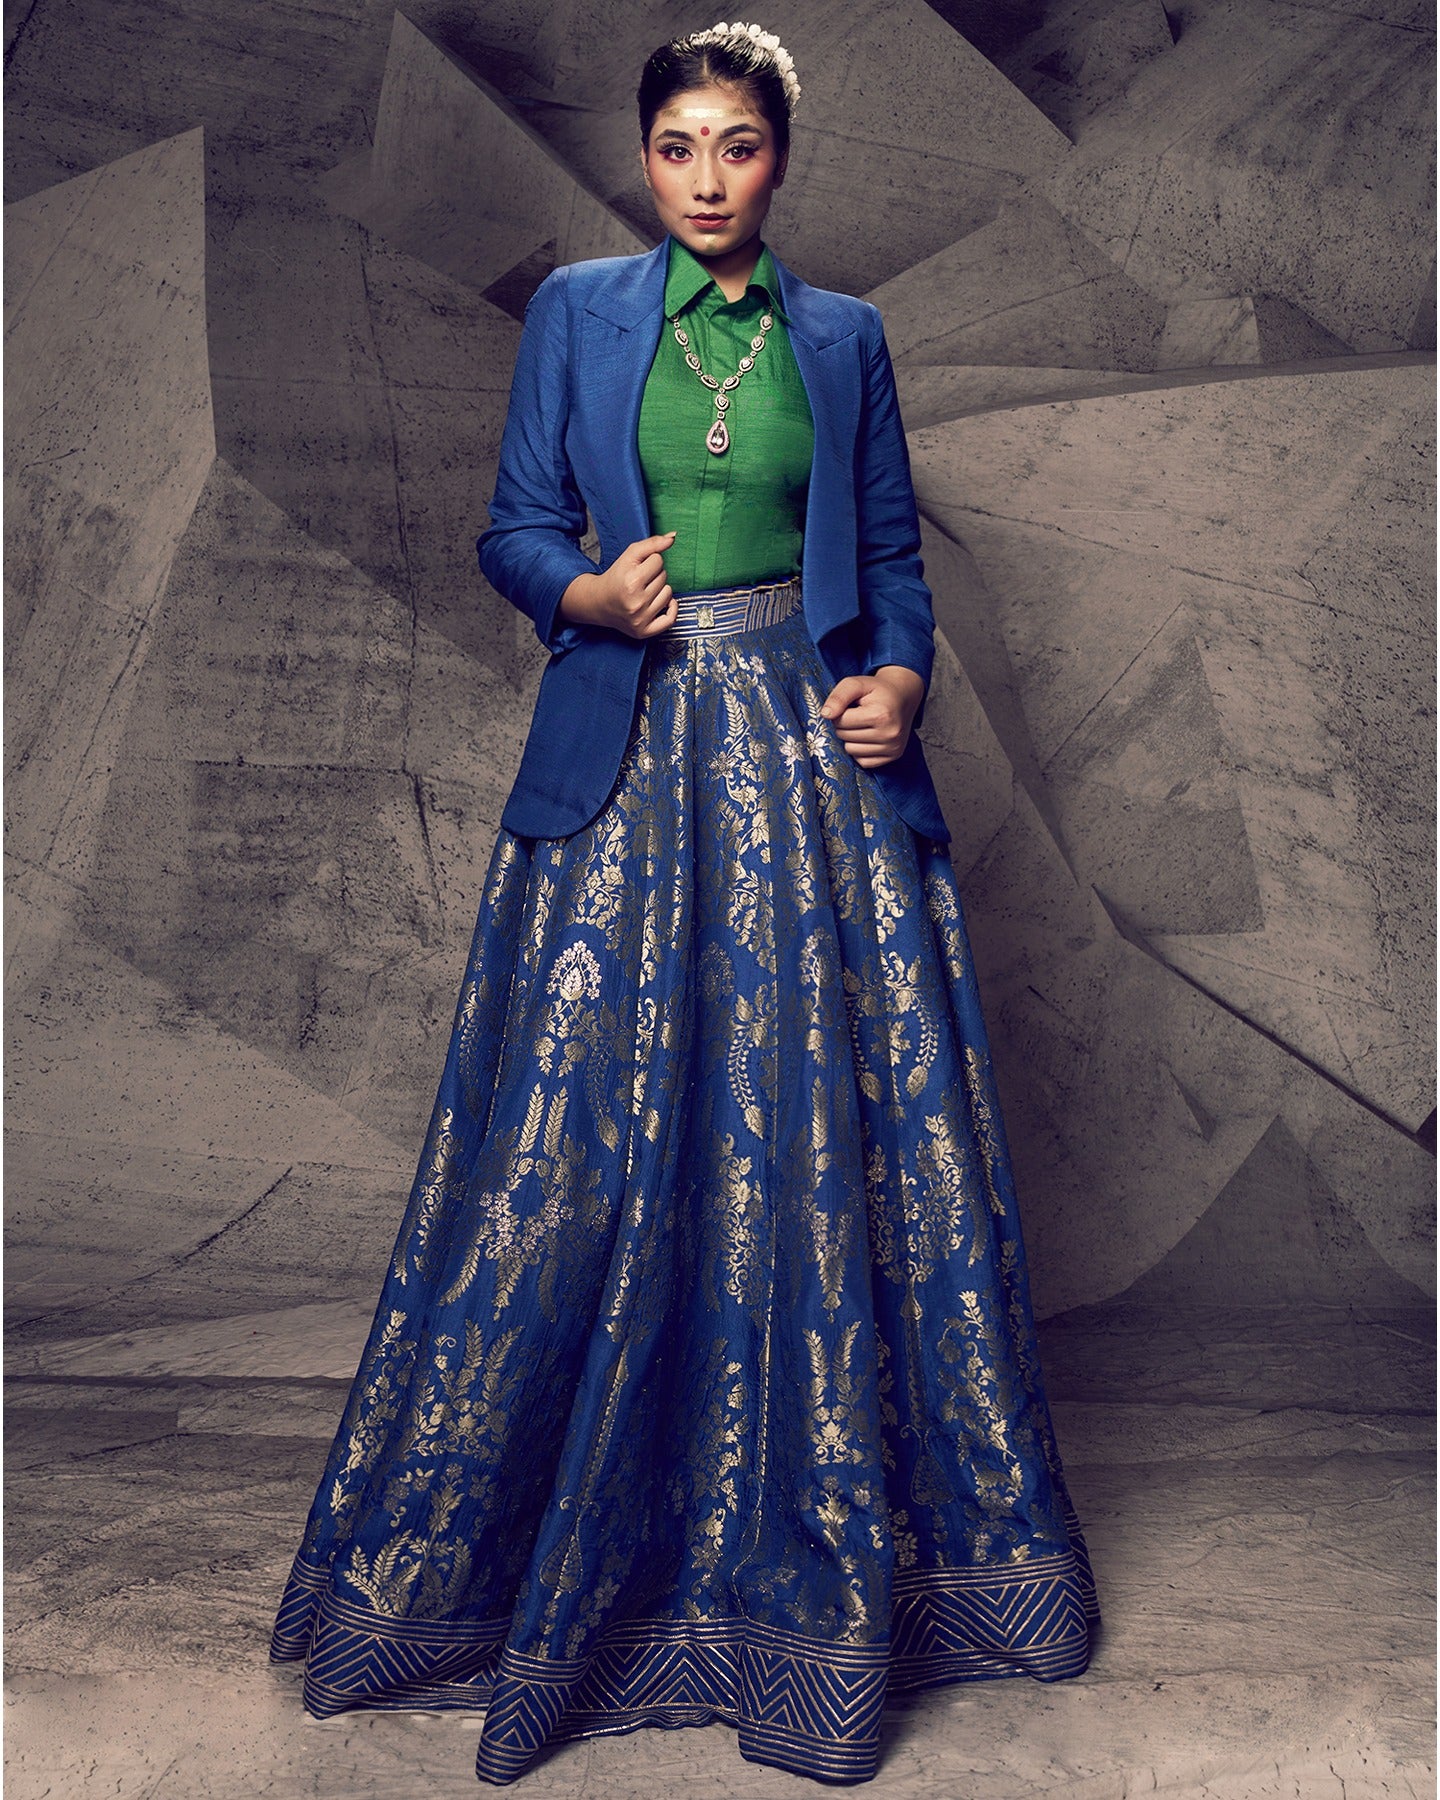 Drenched in the hues of nature, this blue and green lehenga with a collared shirt and blazer is a modern masterpiece.